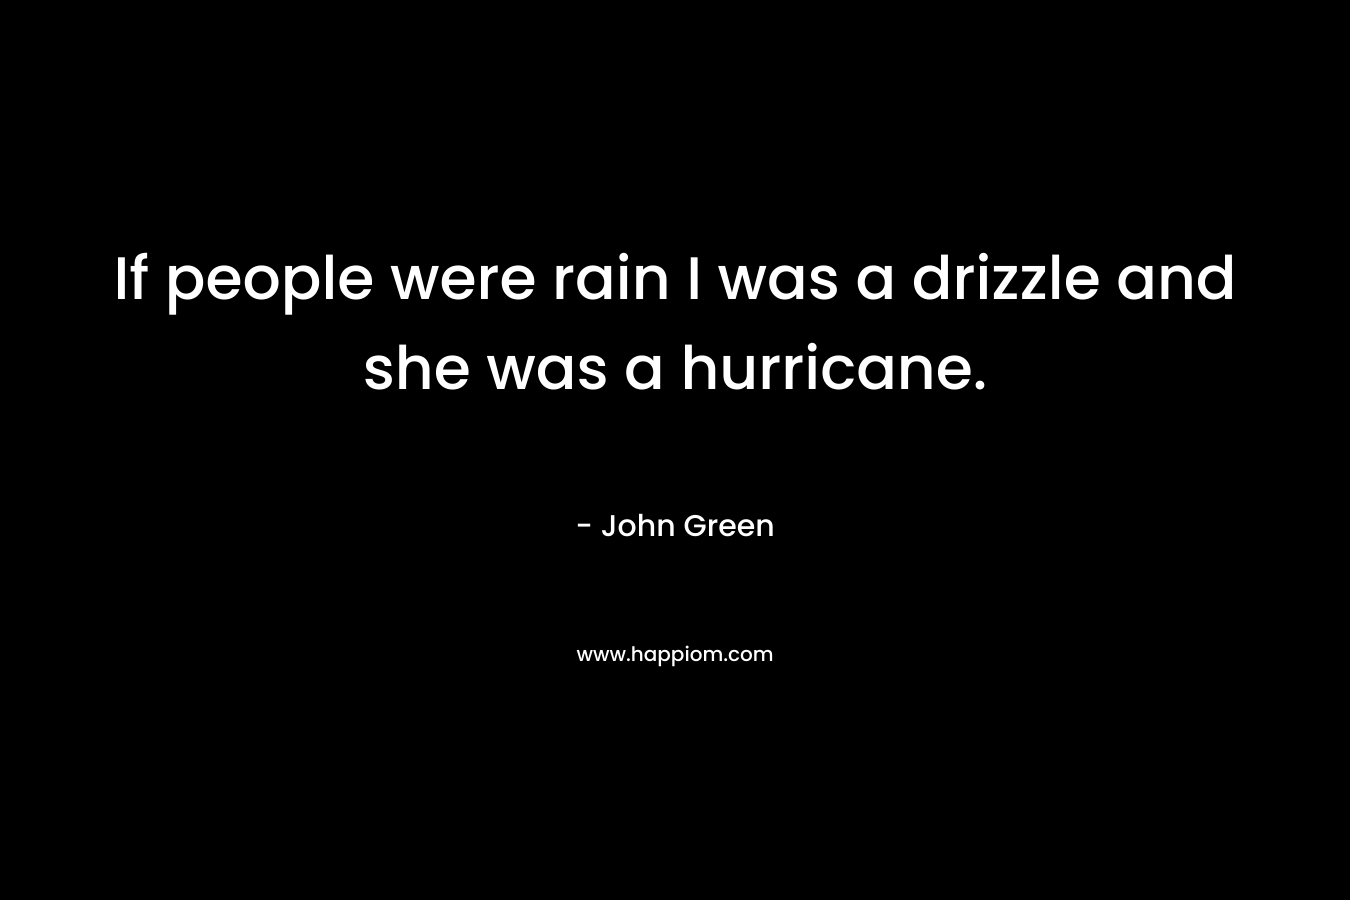 If people were rain I was a drizzle and she was a hurricane. – John Green